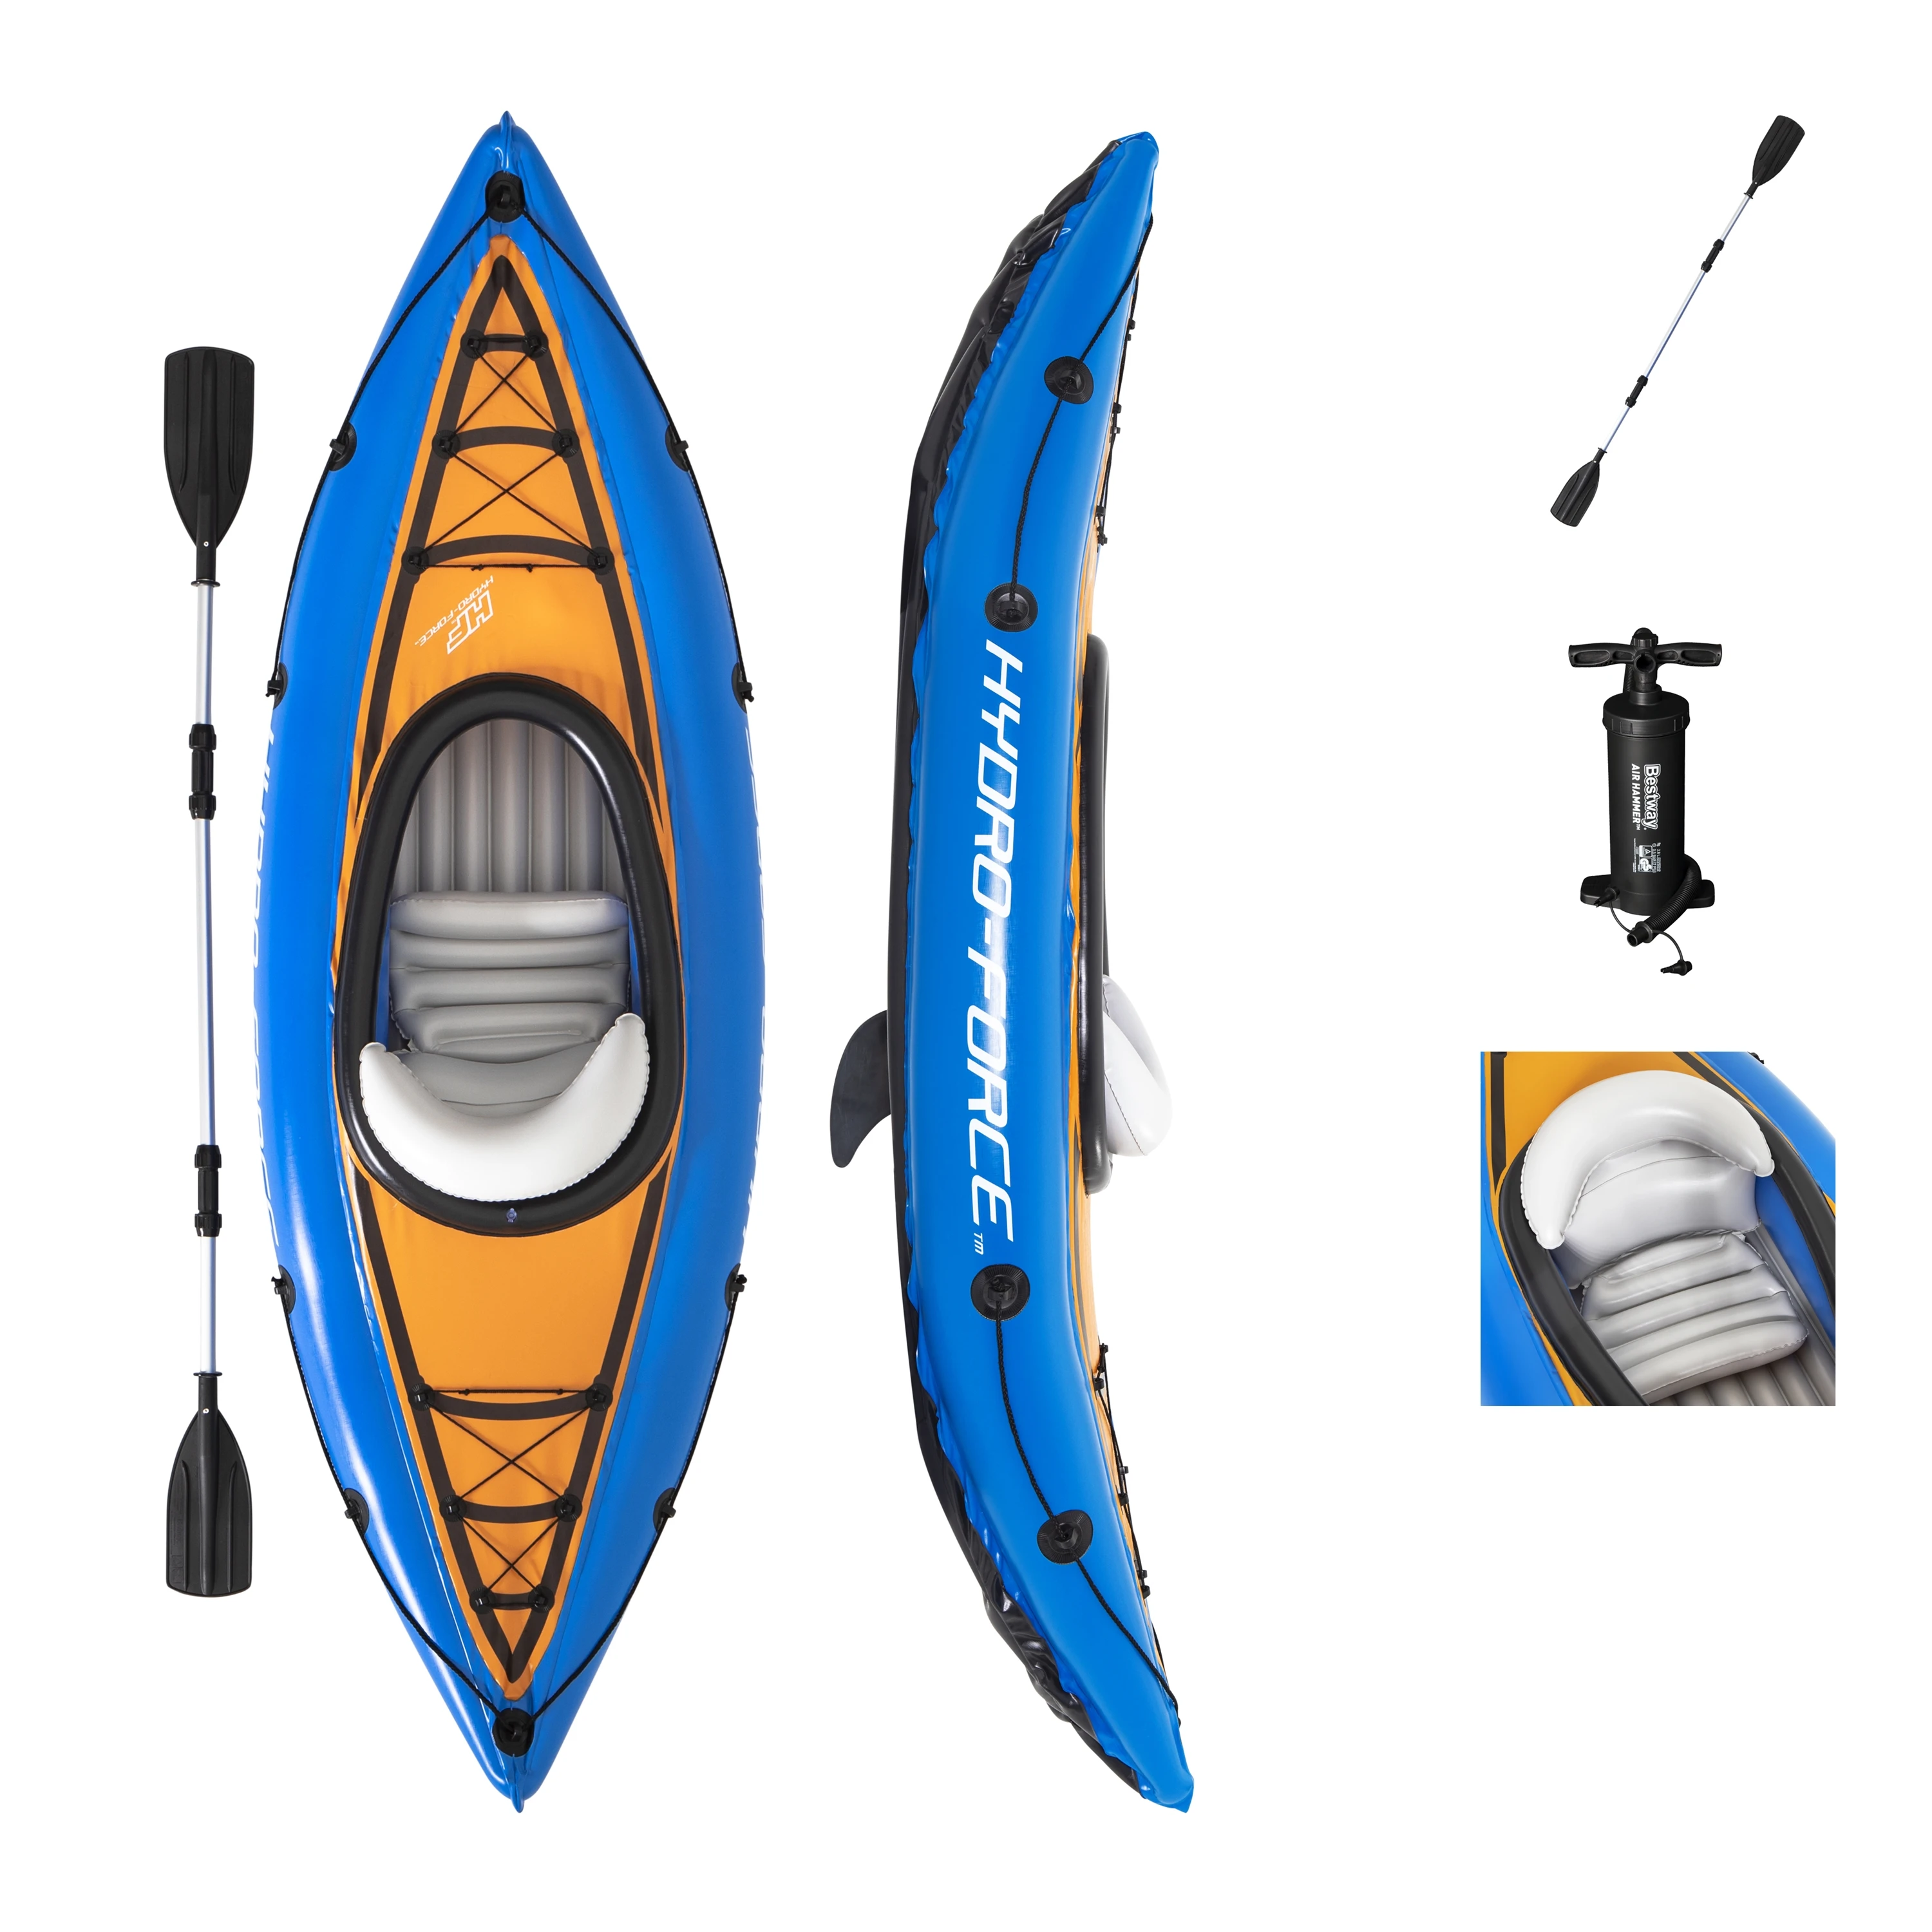 

Bestway 65115 Cove Champion Inflatable Kayak Set inflatable Fishing Kayak 2.75m x 81cm, As picture